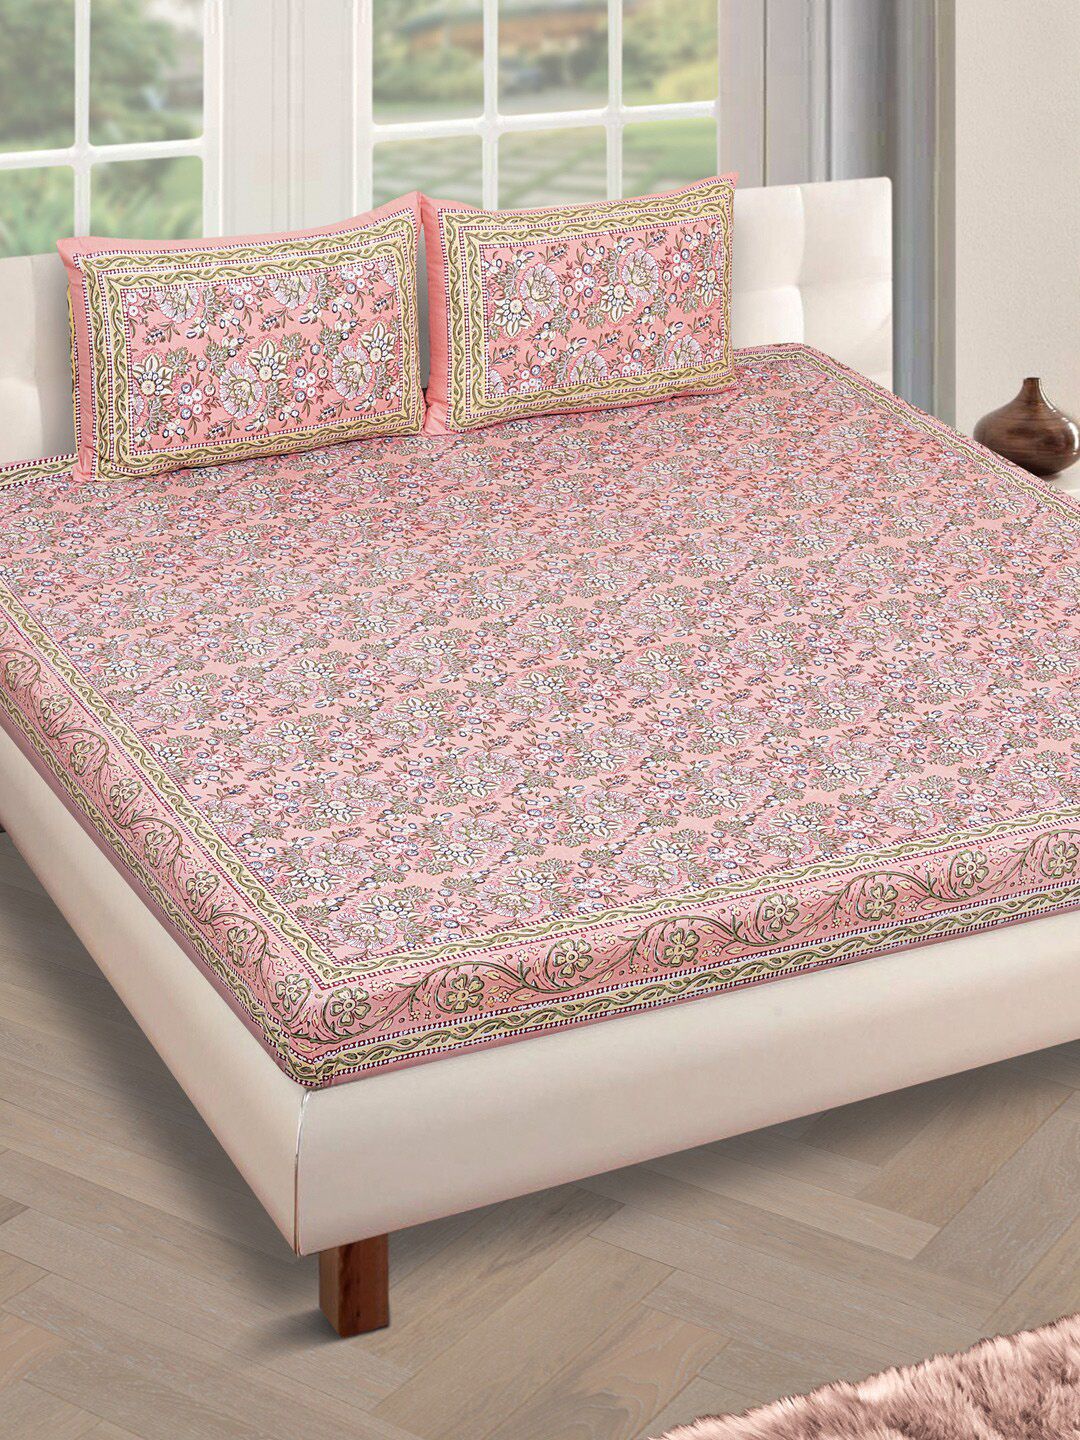 ROMEE Peach-Coloured Floral 180 TC Cotton 1 King Bedsheet with 2 Pillow Covers Price in India